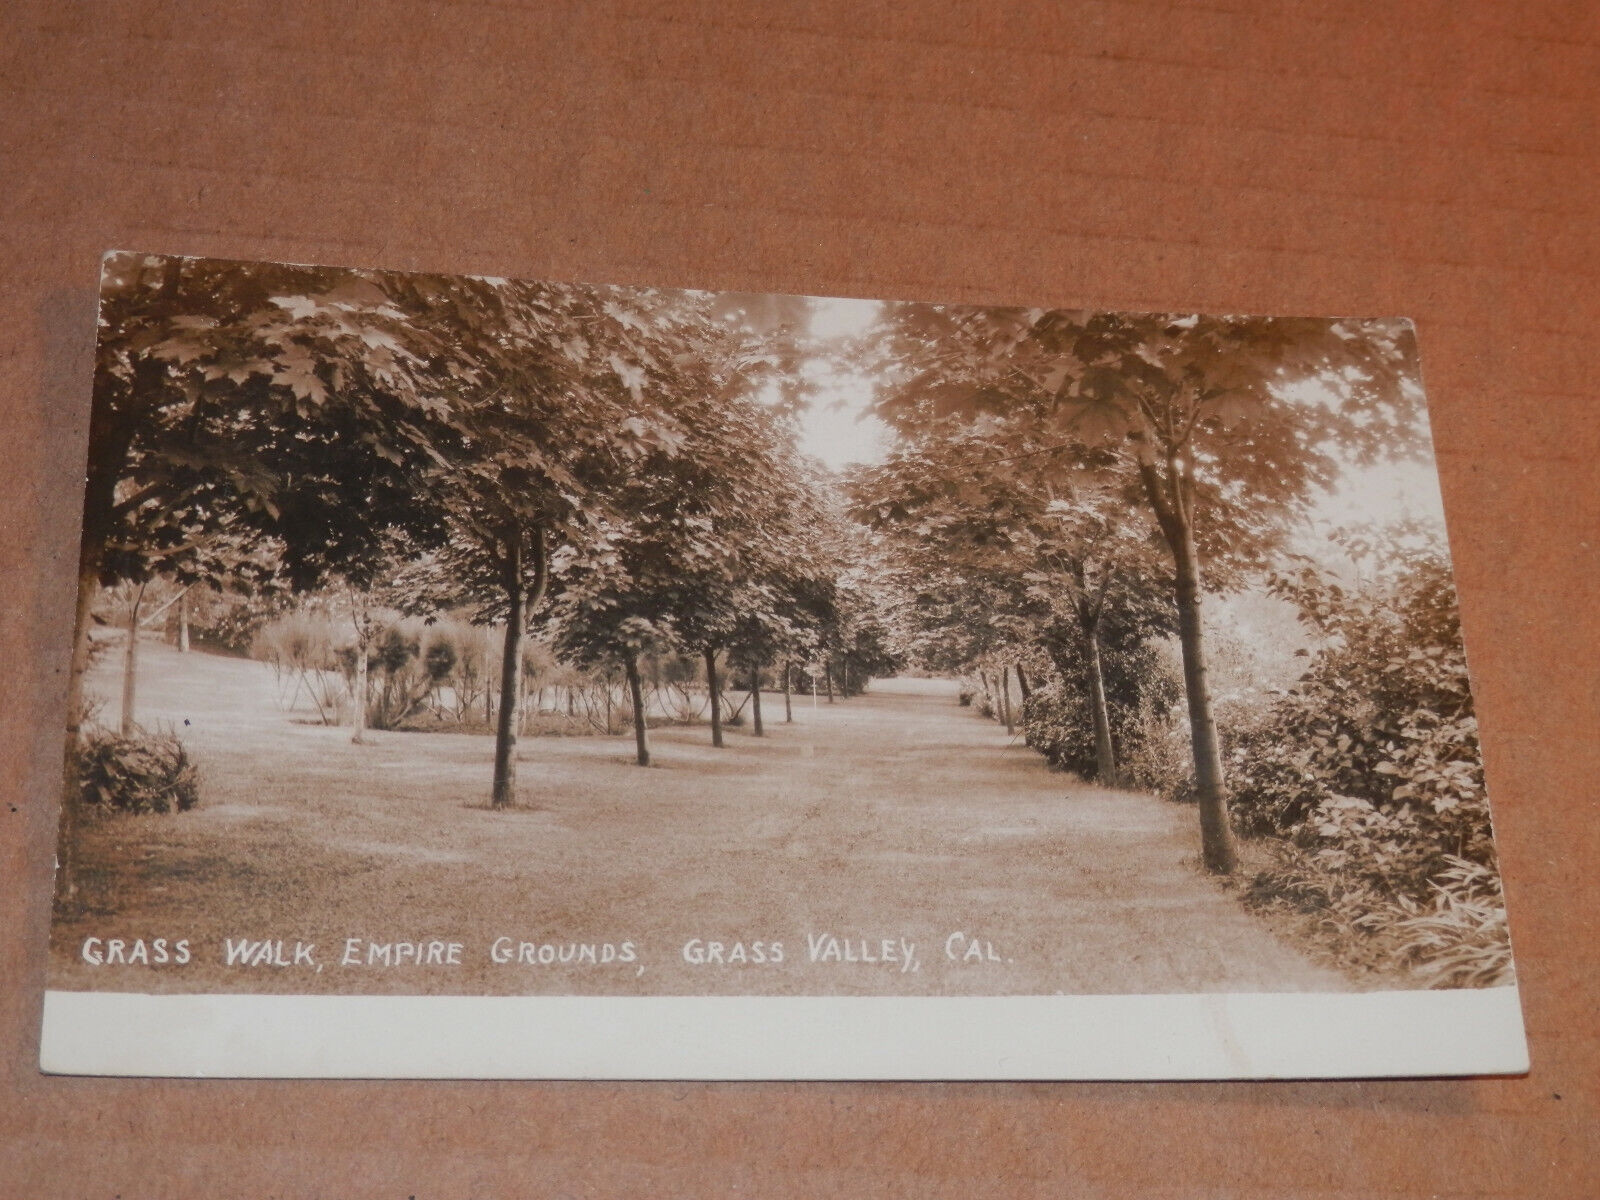 GRASS VALLEY CA - EARLY REAL PHOTO POSTCARD - GRASS WALK EMPIRE GROUNDS - NEVADA